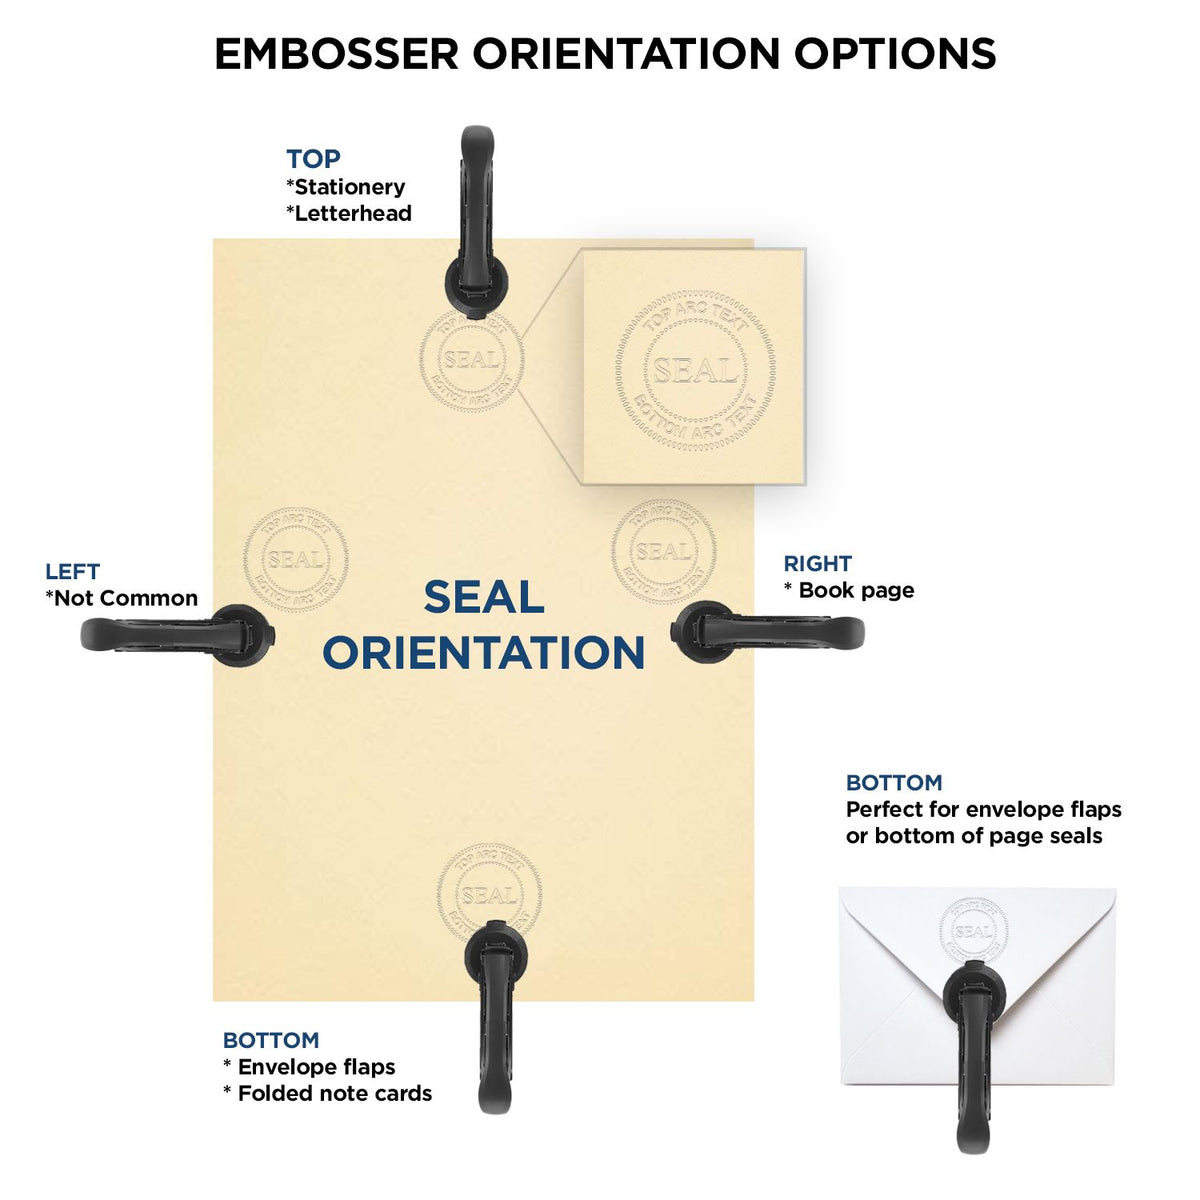 An infographic for the Handheld Washington Architect Seal Embosser showing embosser orientation, this is showing examples of a top, bottom, right and left insert.